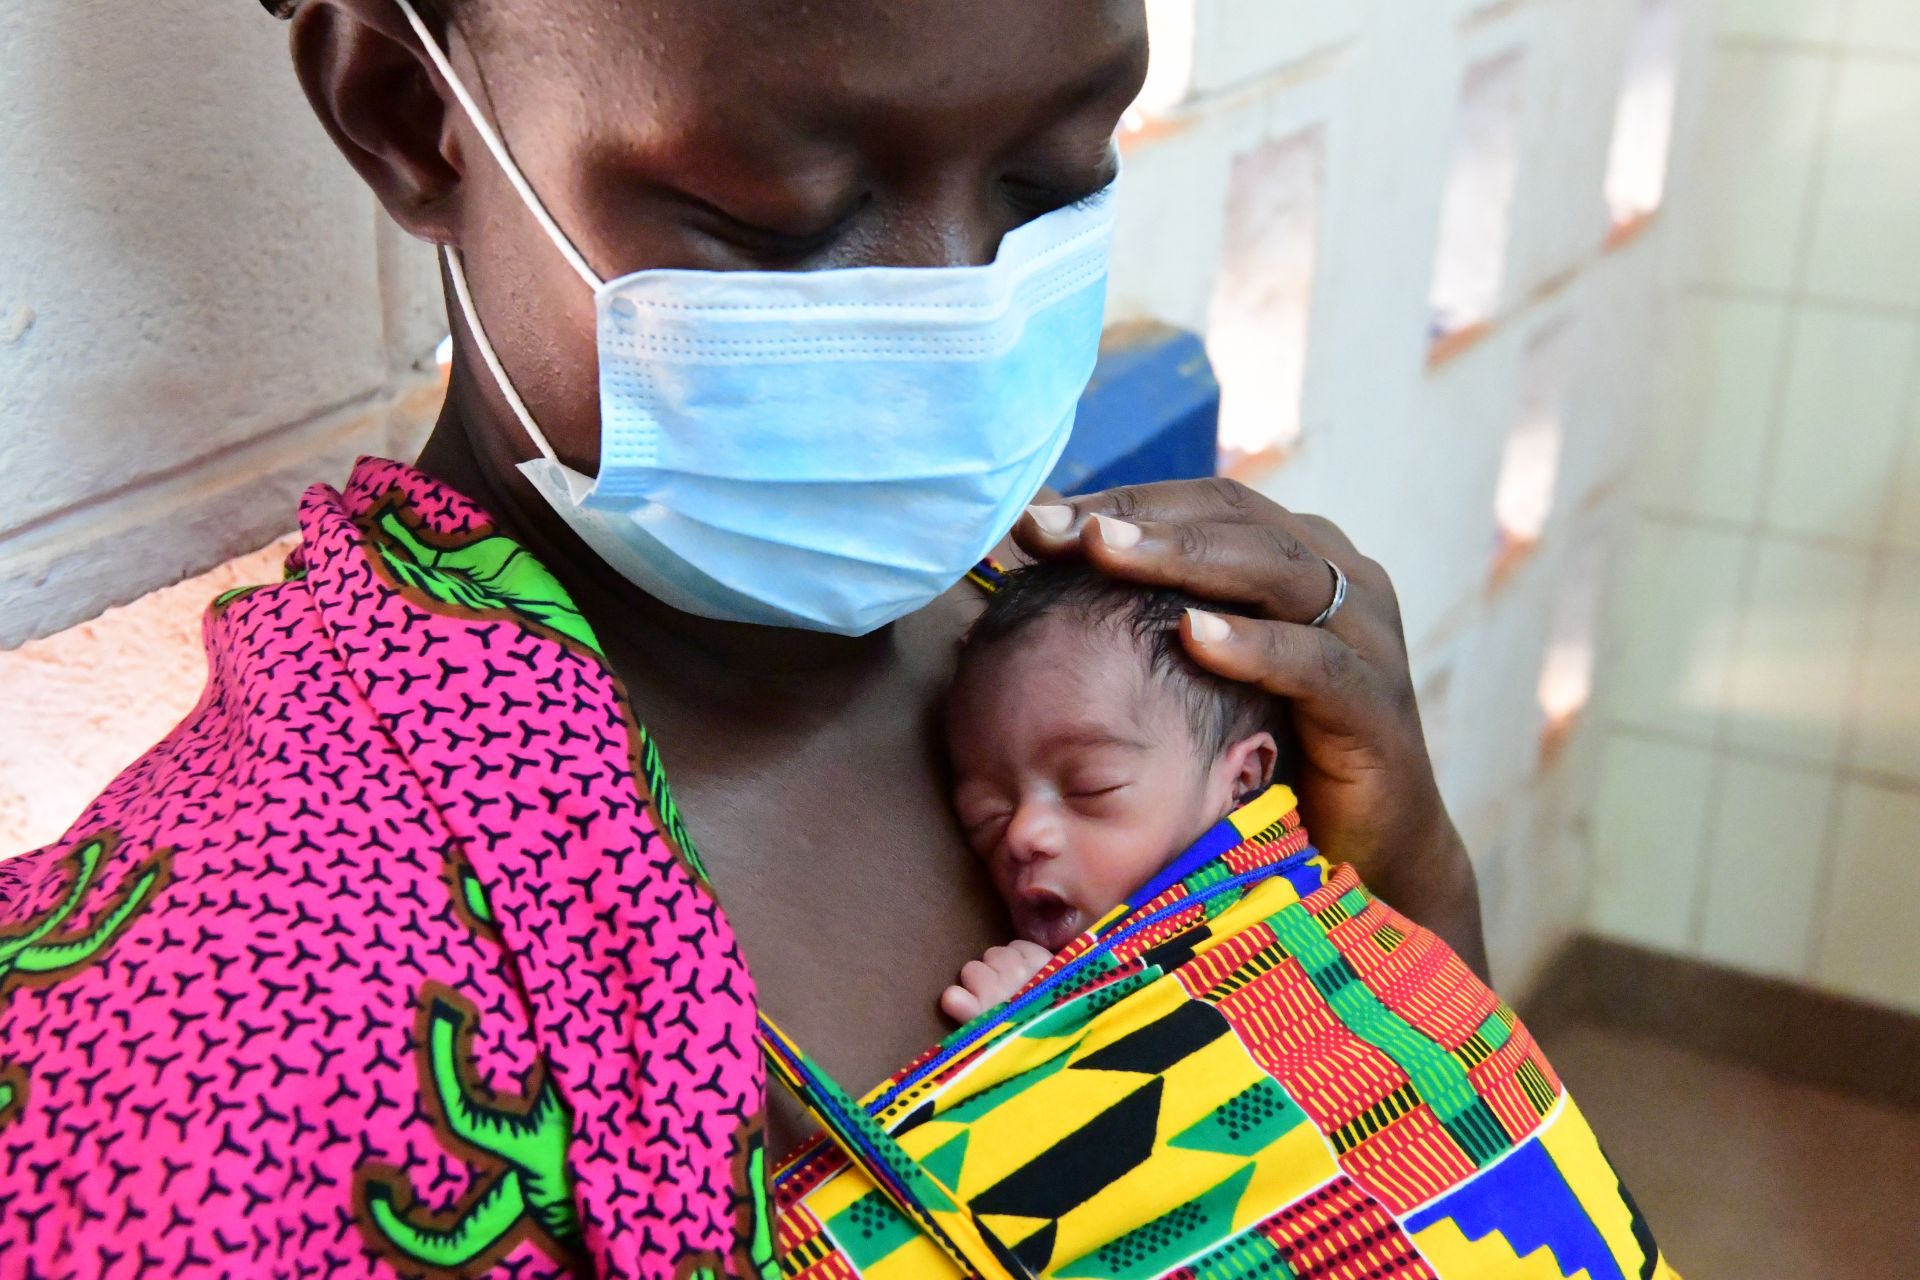 unicef calls on to maintain lifesaving services for pregnant women and newborns amid covid 19 pandemic